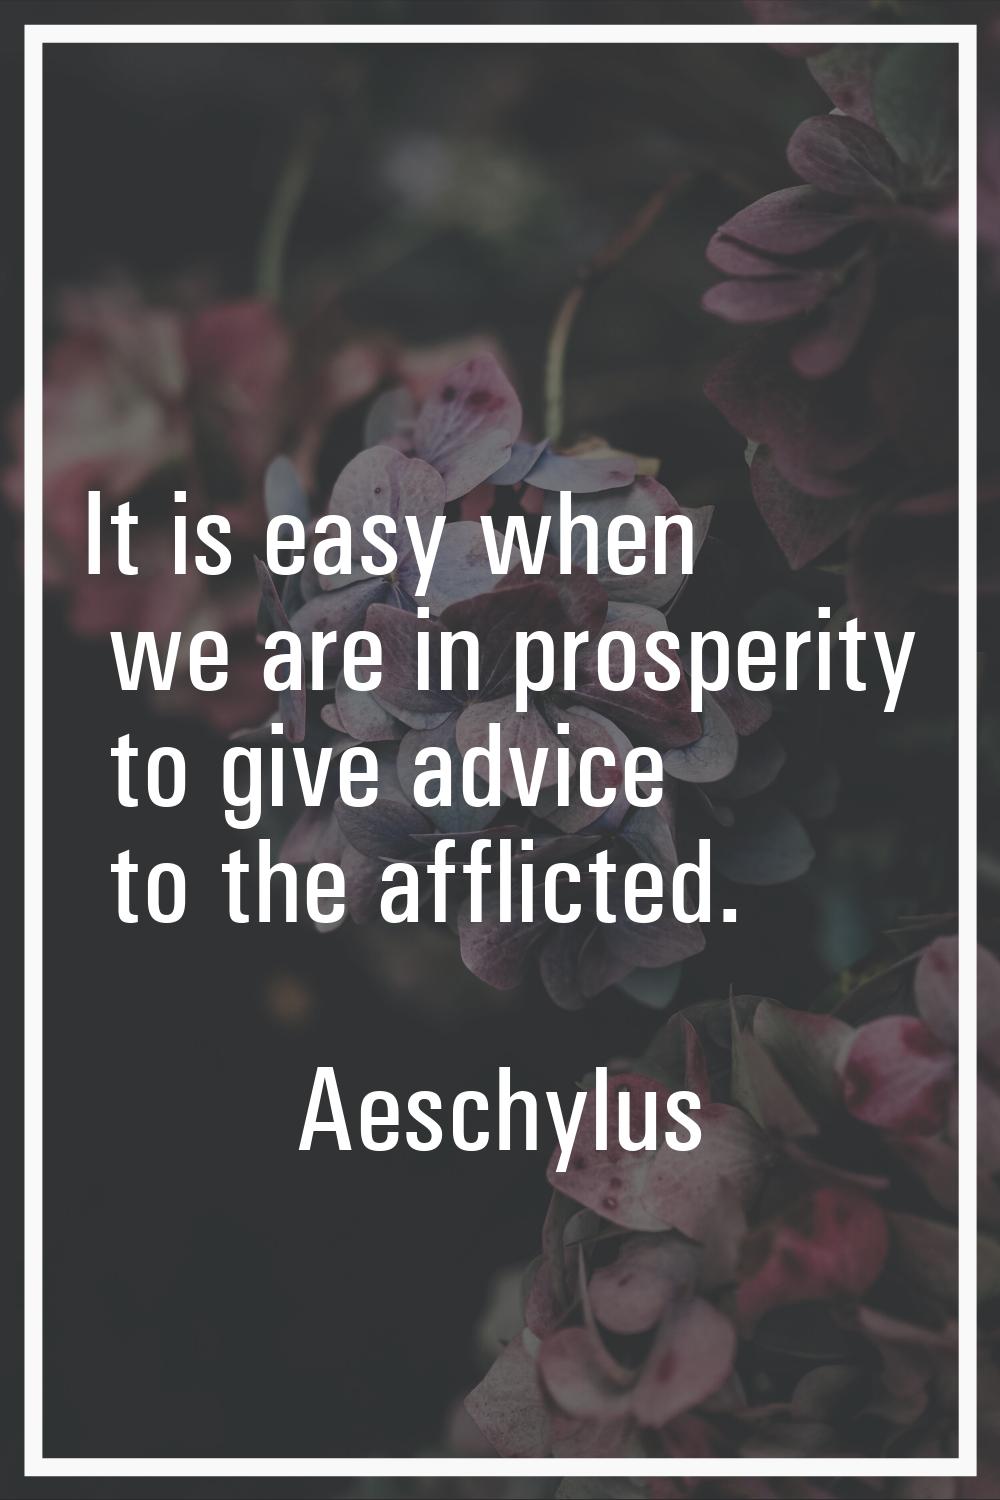 It is easy when we are in prosperity to give advice to the afflicted.